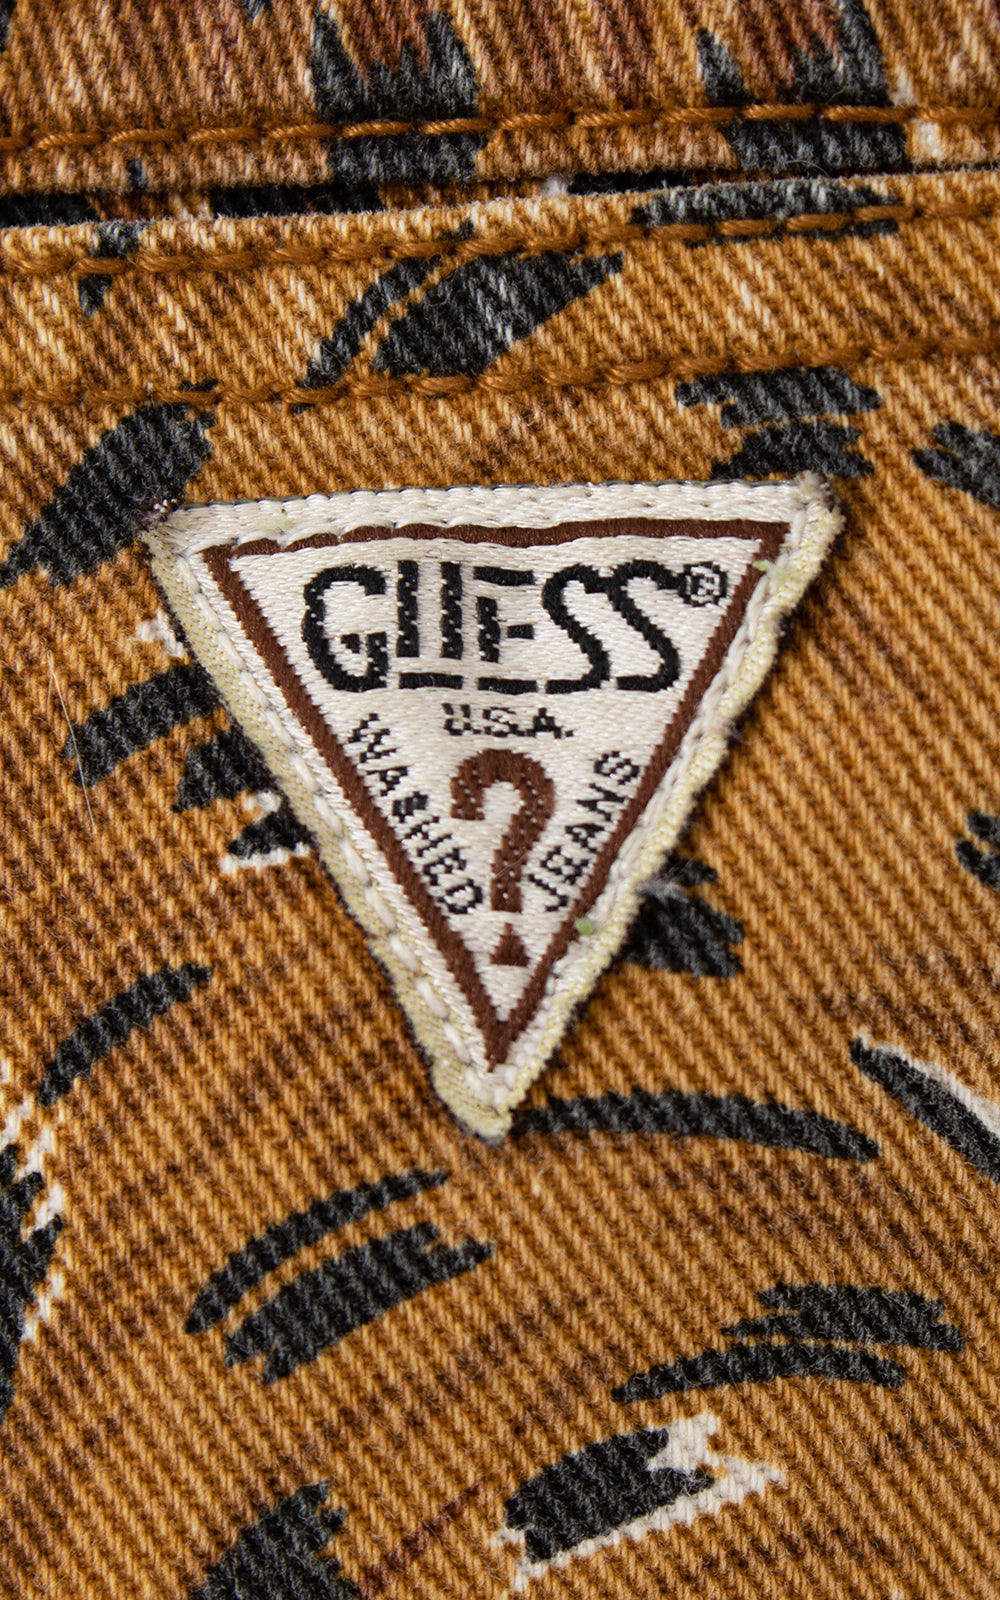 1980s GUESS Leopard Print Jeans | x-small/small